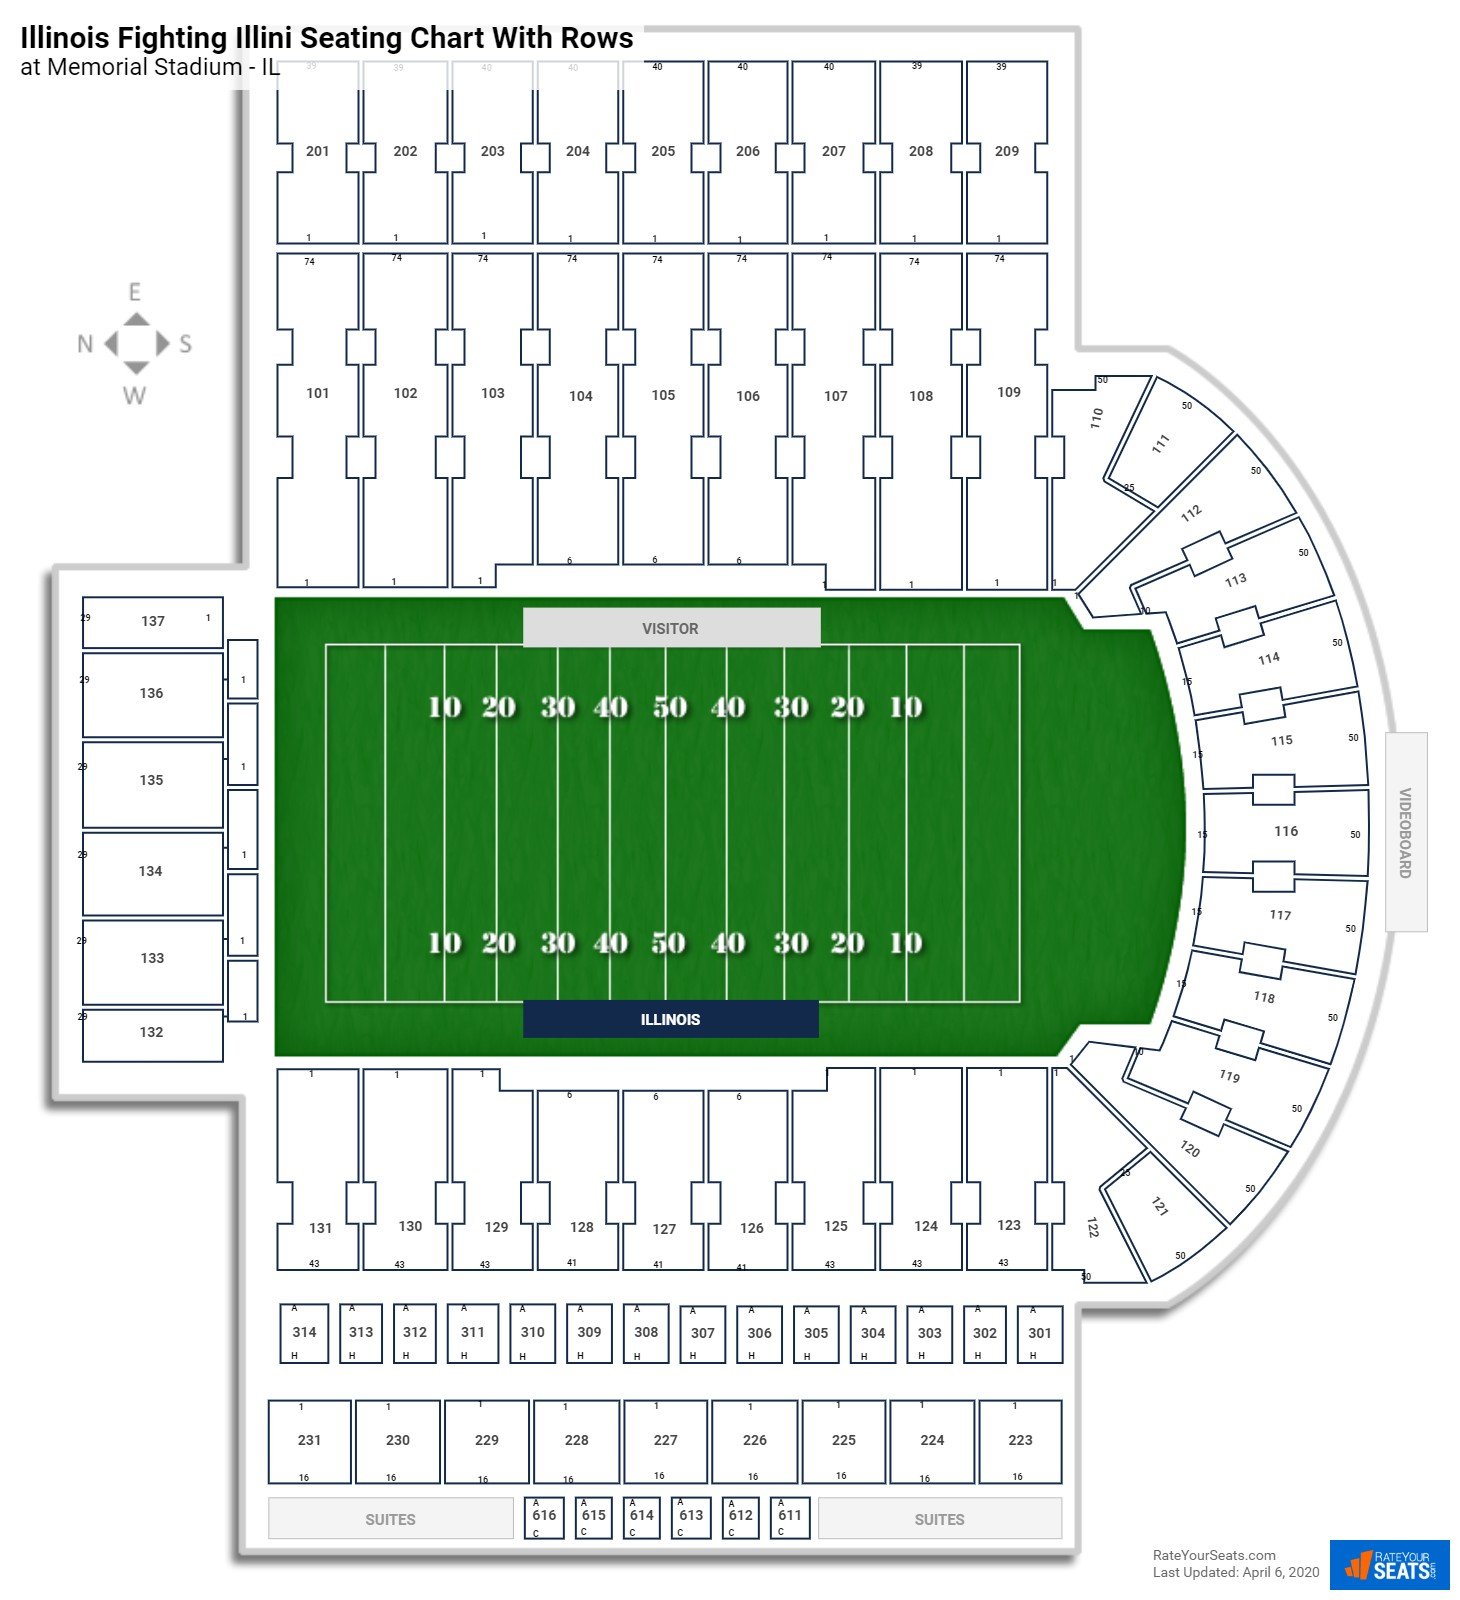 Memorial Stadium (Illinois) seating chart with row numbers